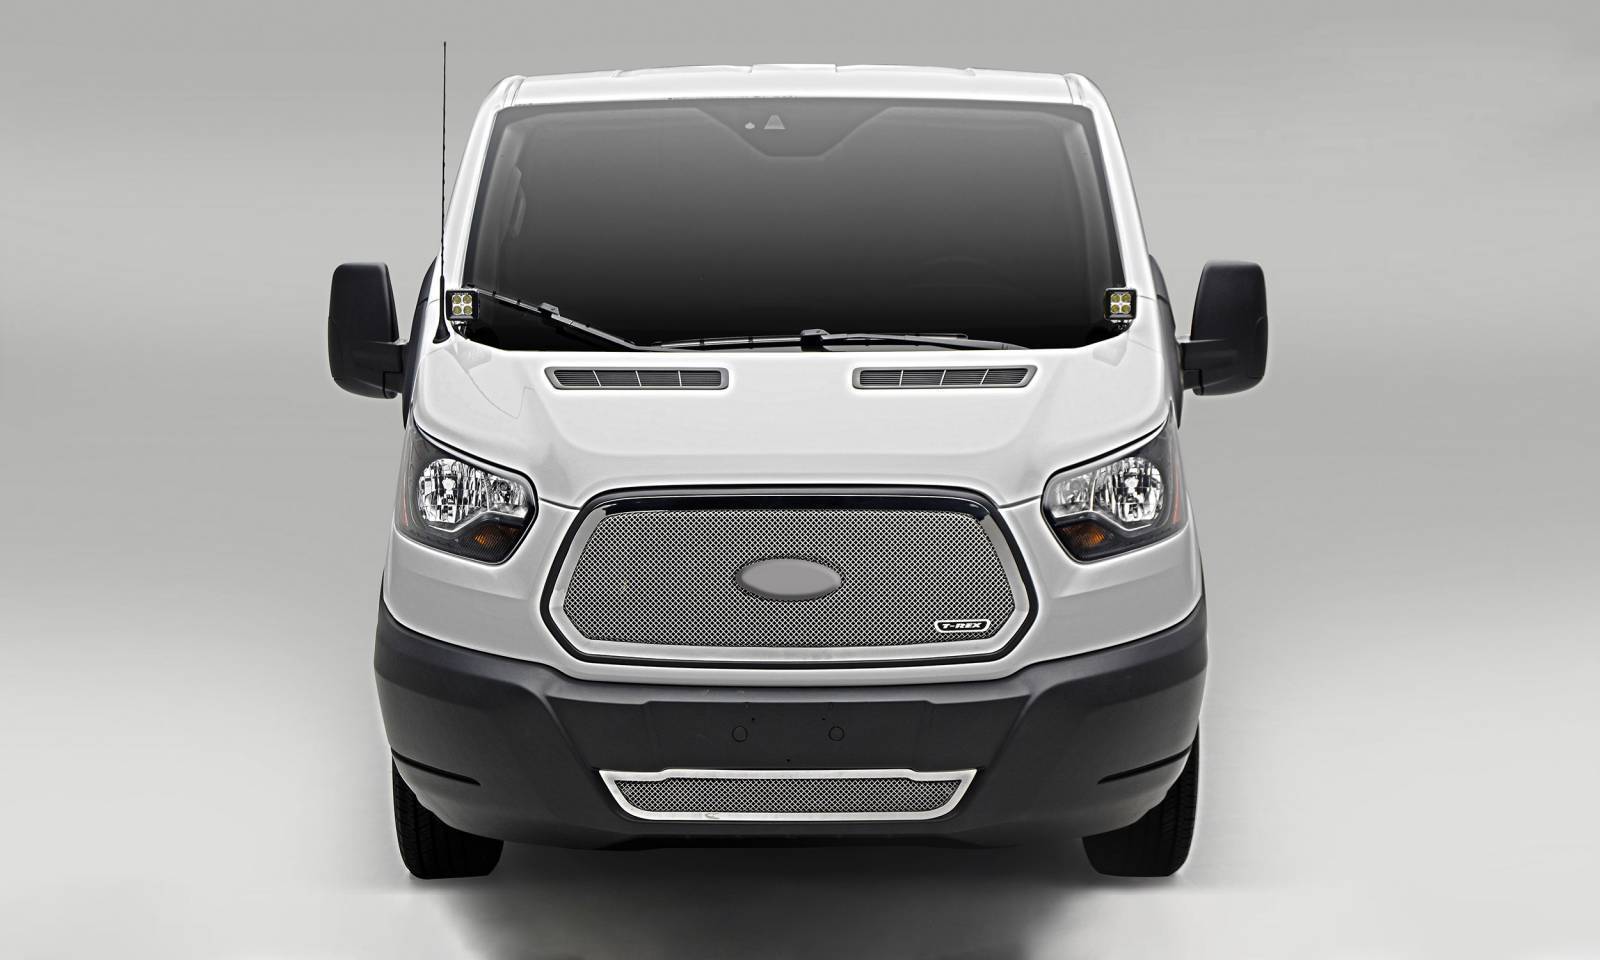 T-REX Grilles 54575 Polished Stainless Steel Small Mesh Grille Fits 2016-2018 Ford Transit